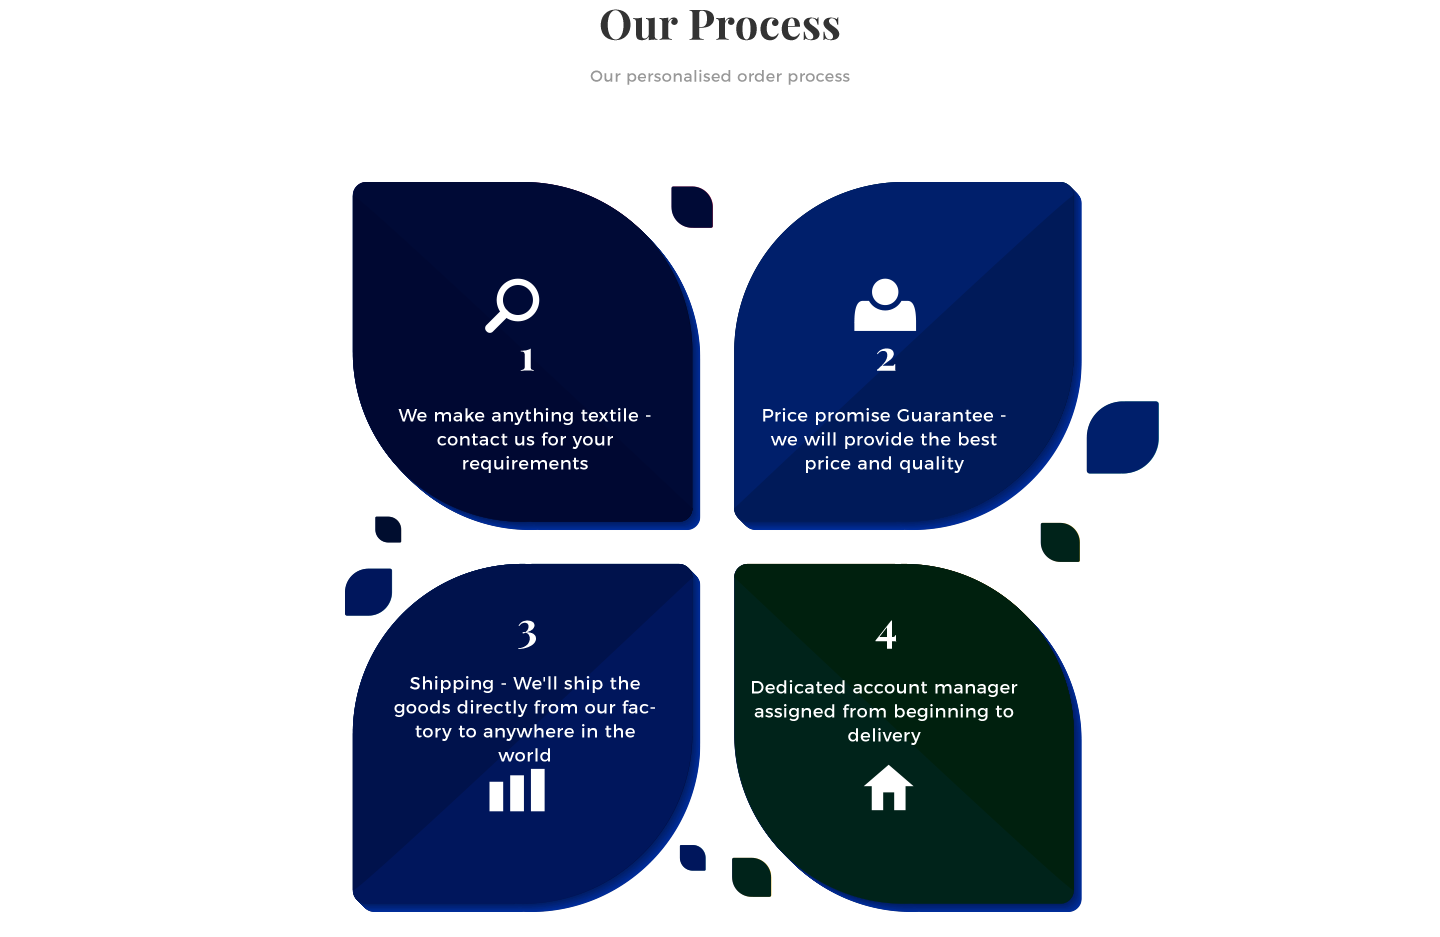 Our Process - our personalised order process